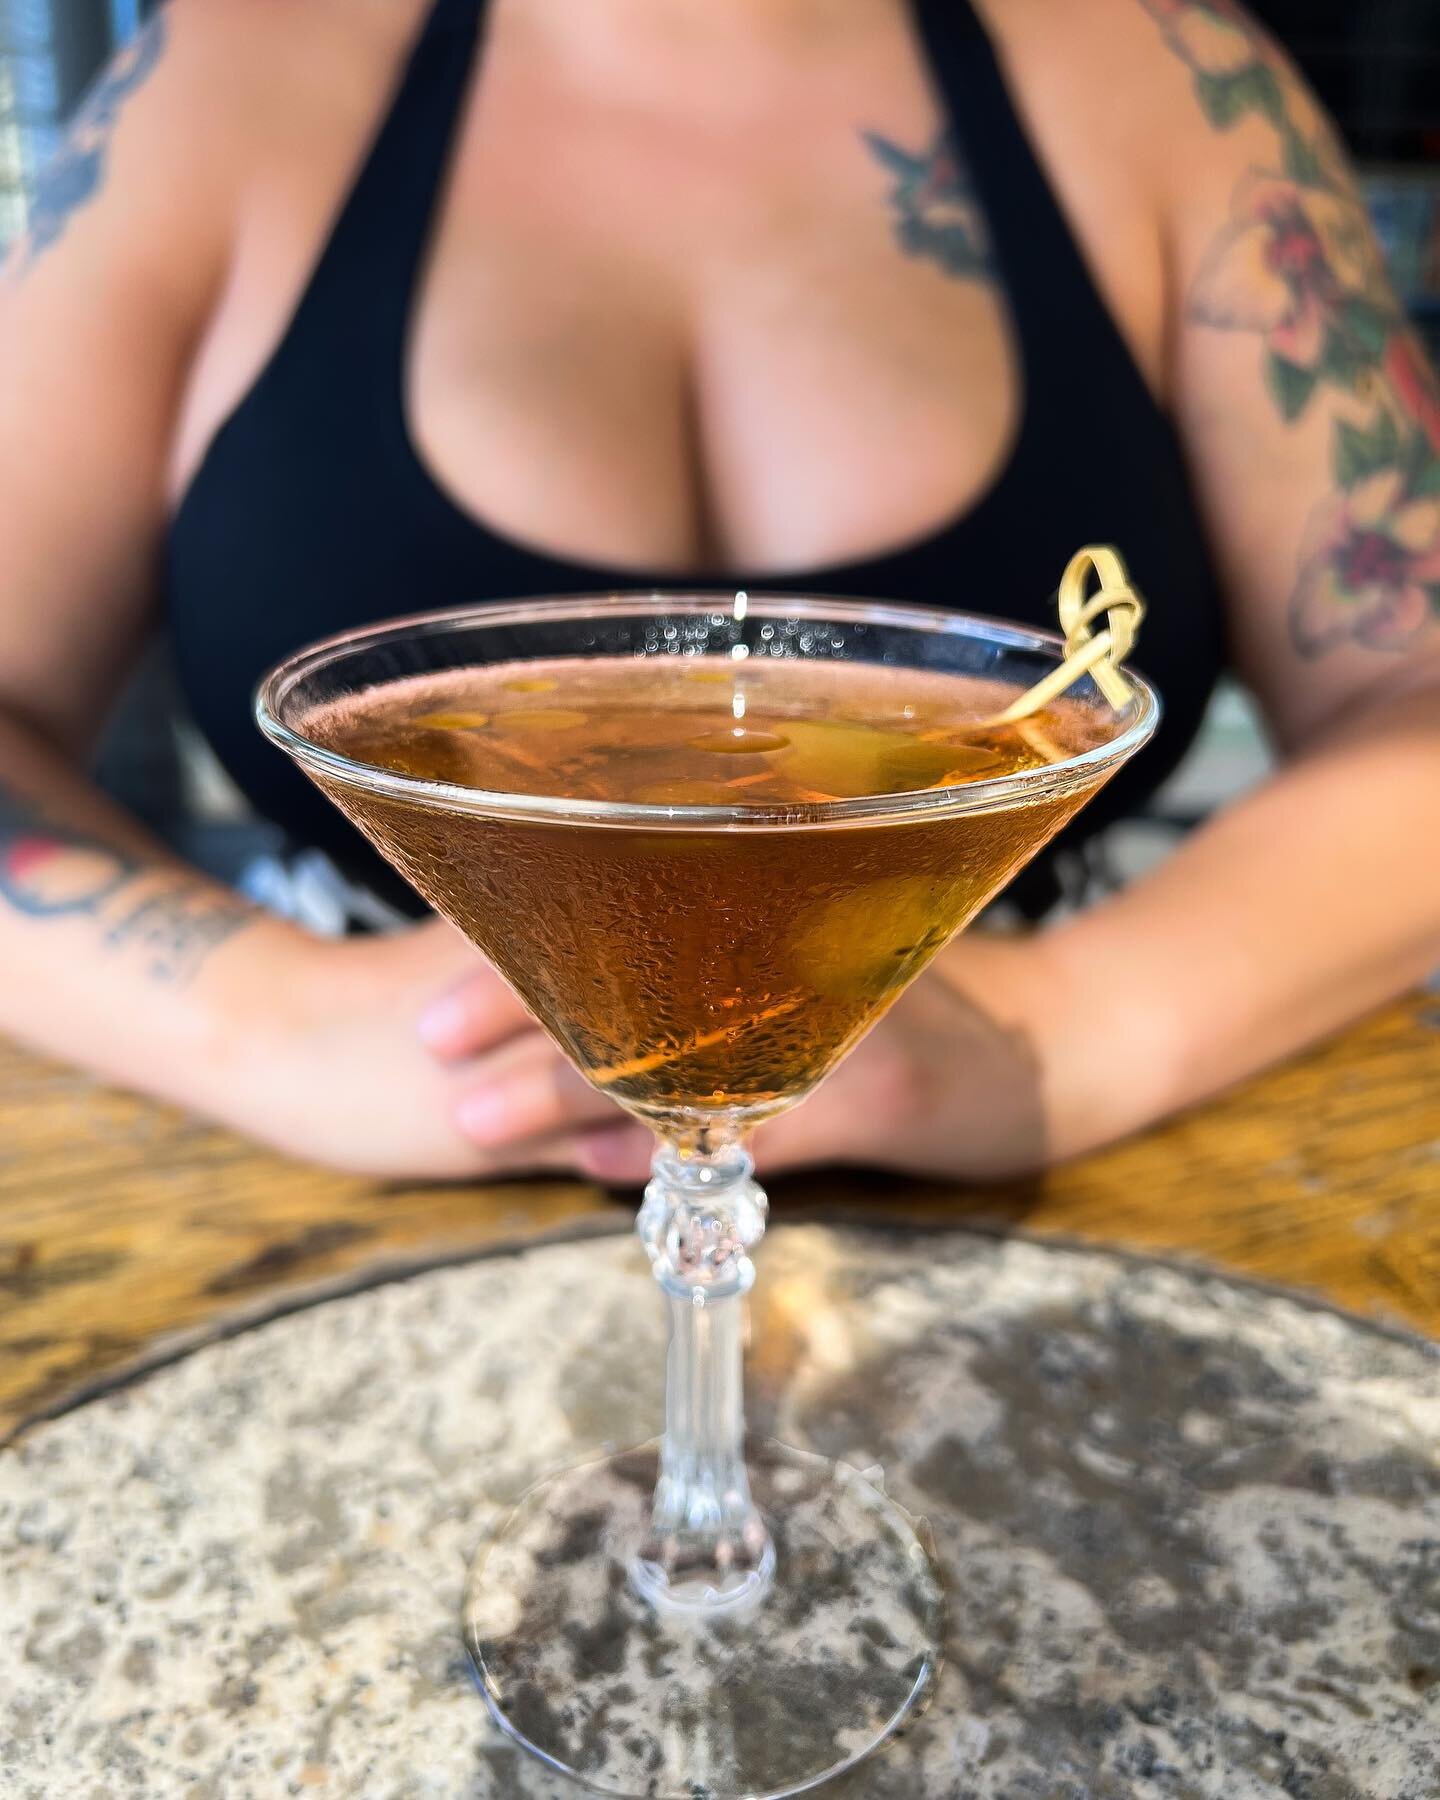 What a sight!&hellip;. Oh and by the way this is our new cocktail of the week 

&ldquo;Blackbeards Karma&rdquo;
Kinobi Dry Gin
Lustao Sherry
Olive Brine
Celery Bitters 
Served with a blue cheese stuffed olive &amp; basil oil 😋 

Jazz night tonight (